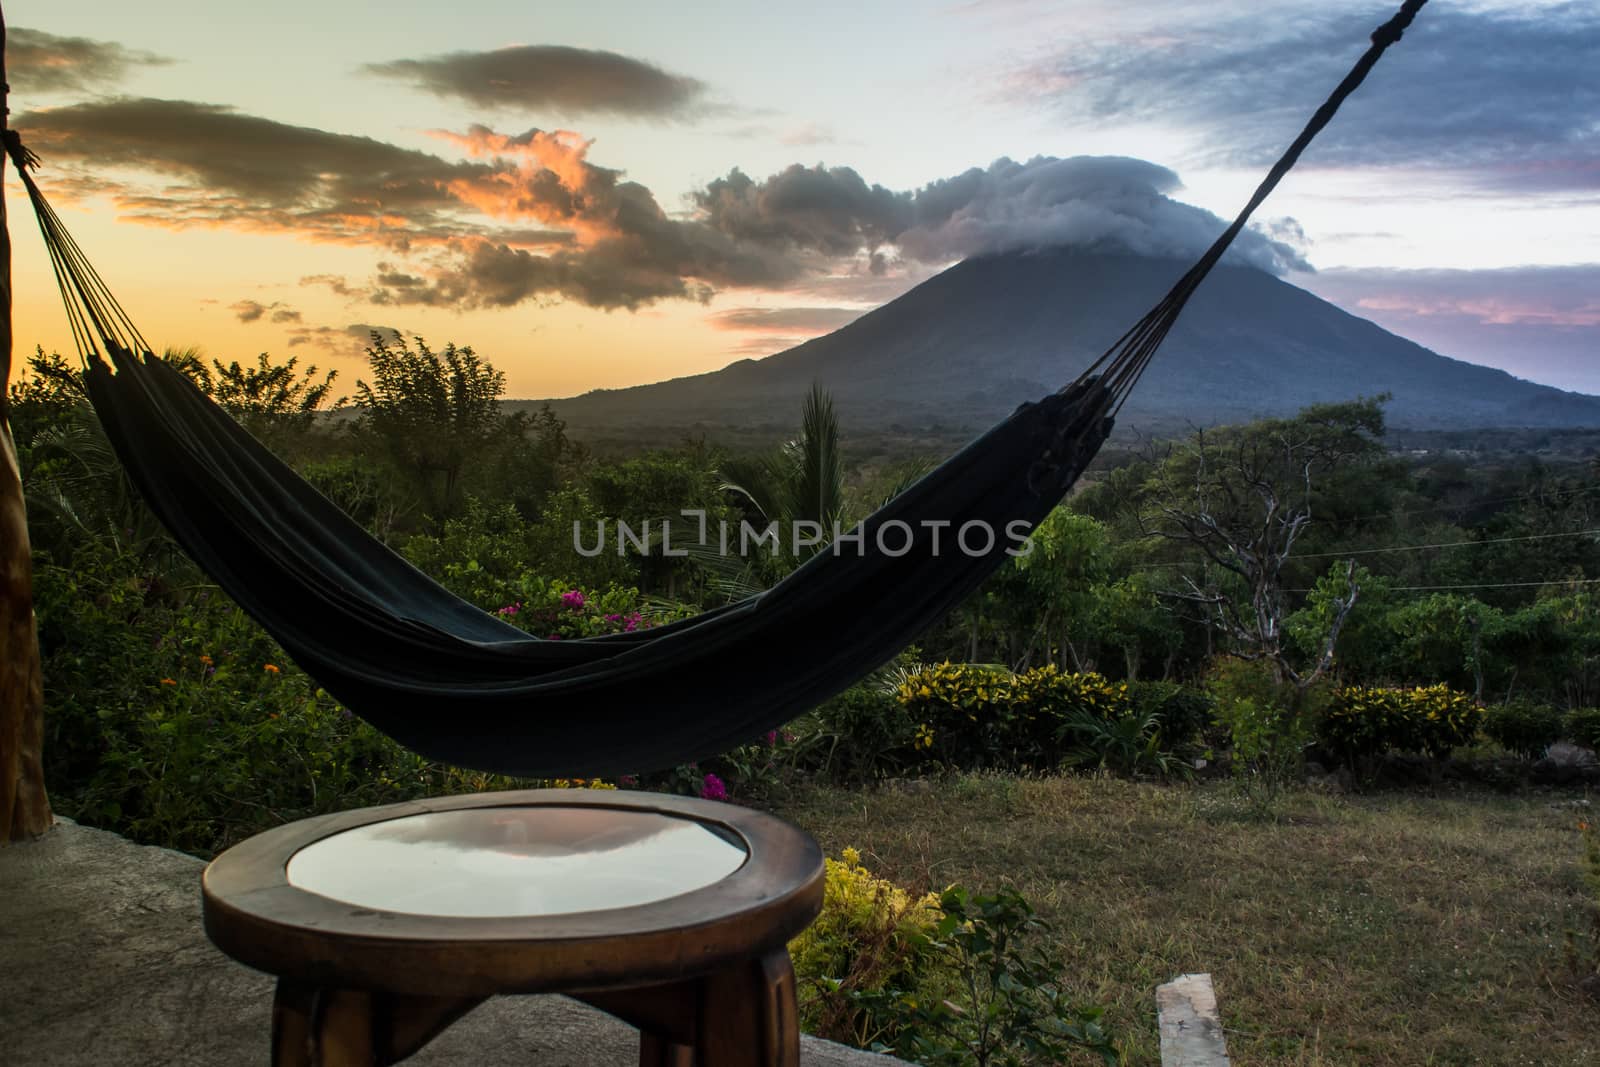 relaxing landscape showing amaca and volcano on background